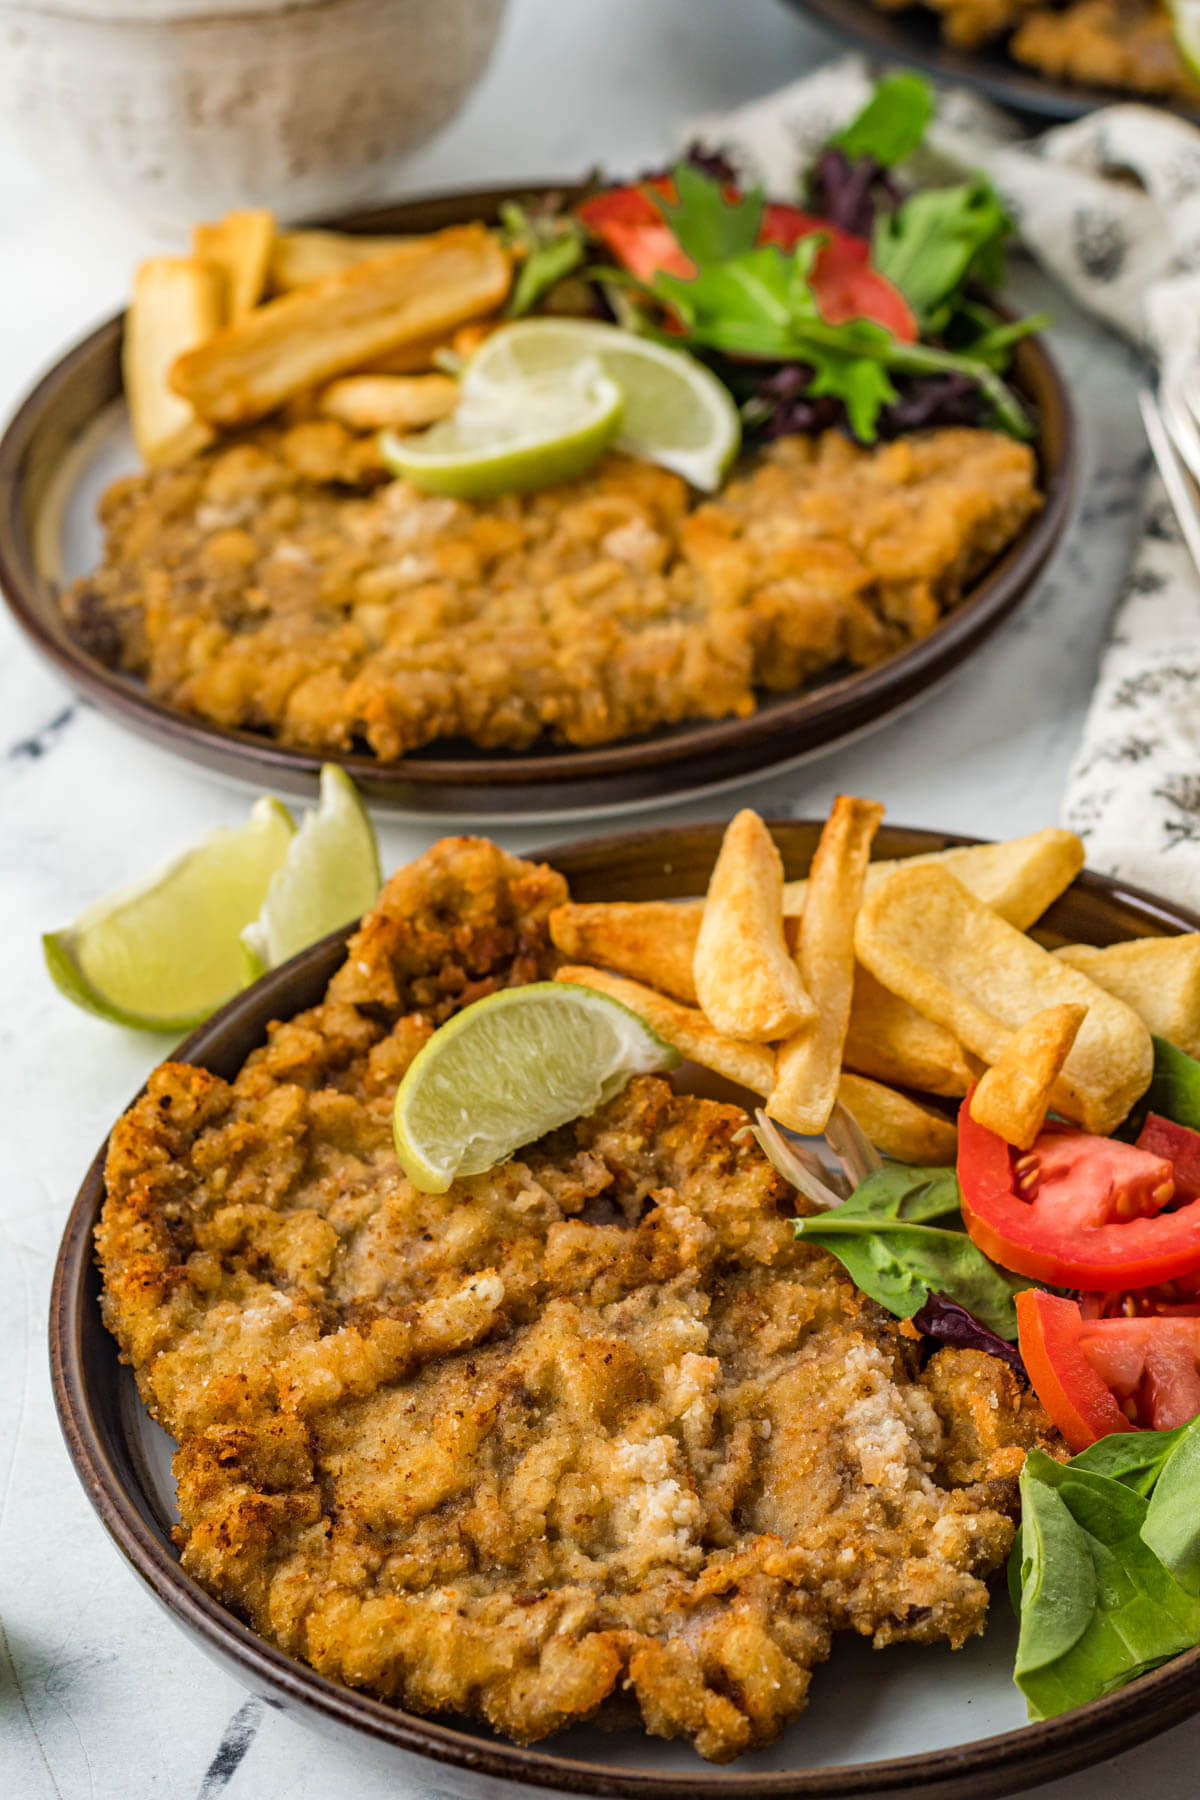 Two plates full of golden fried Milanesa de res with chips and a salad.